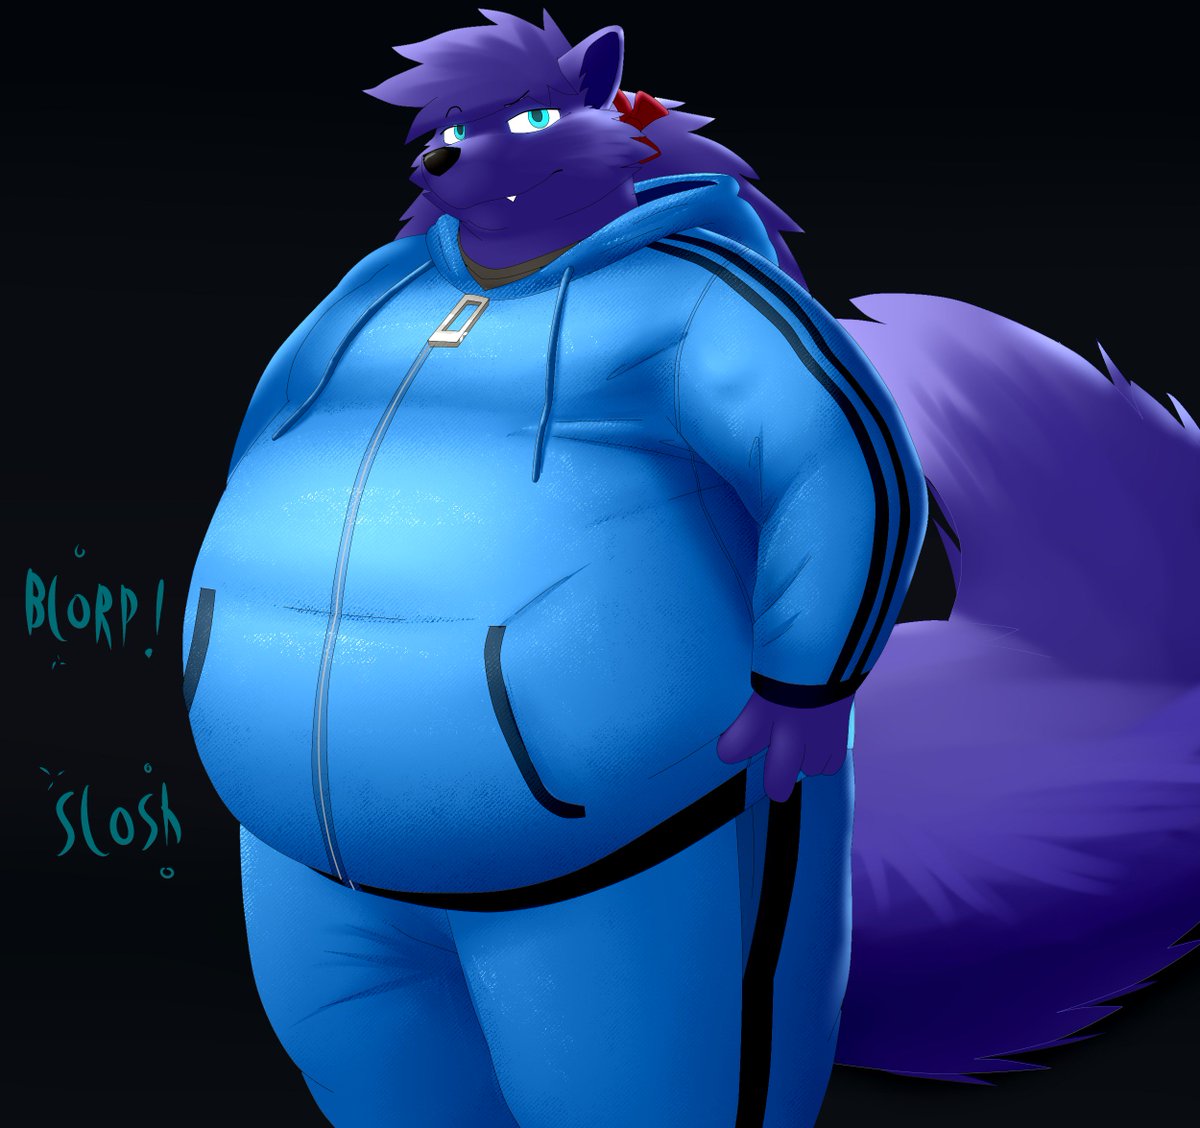 Commission for @PuffWuffWingu of him pulling off the classic blueberry look...